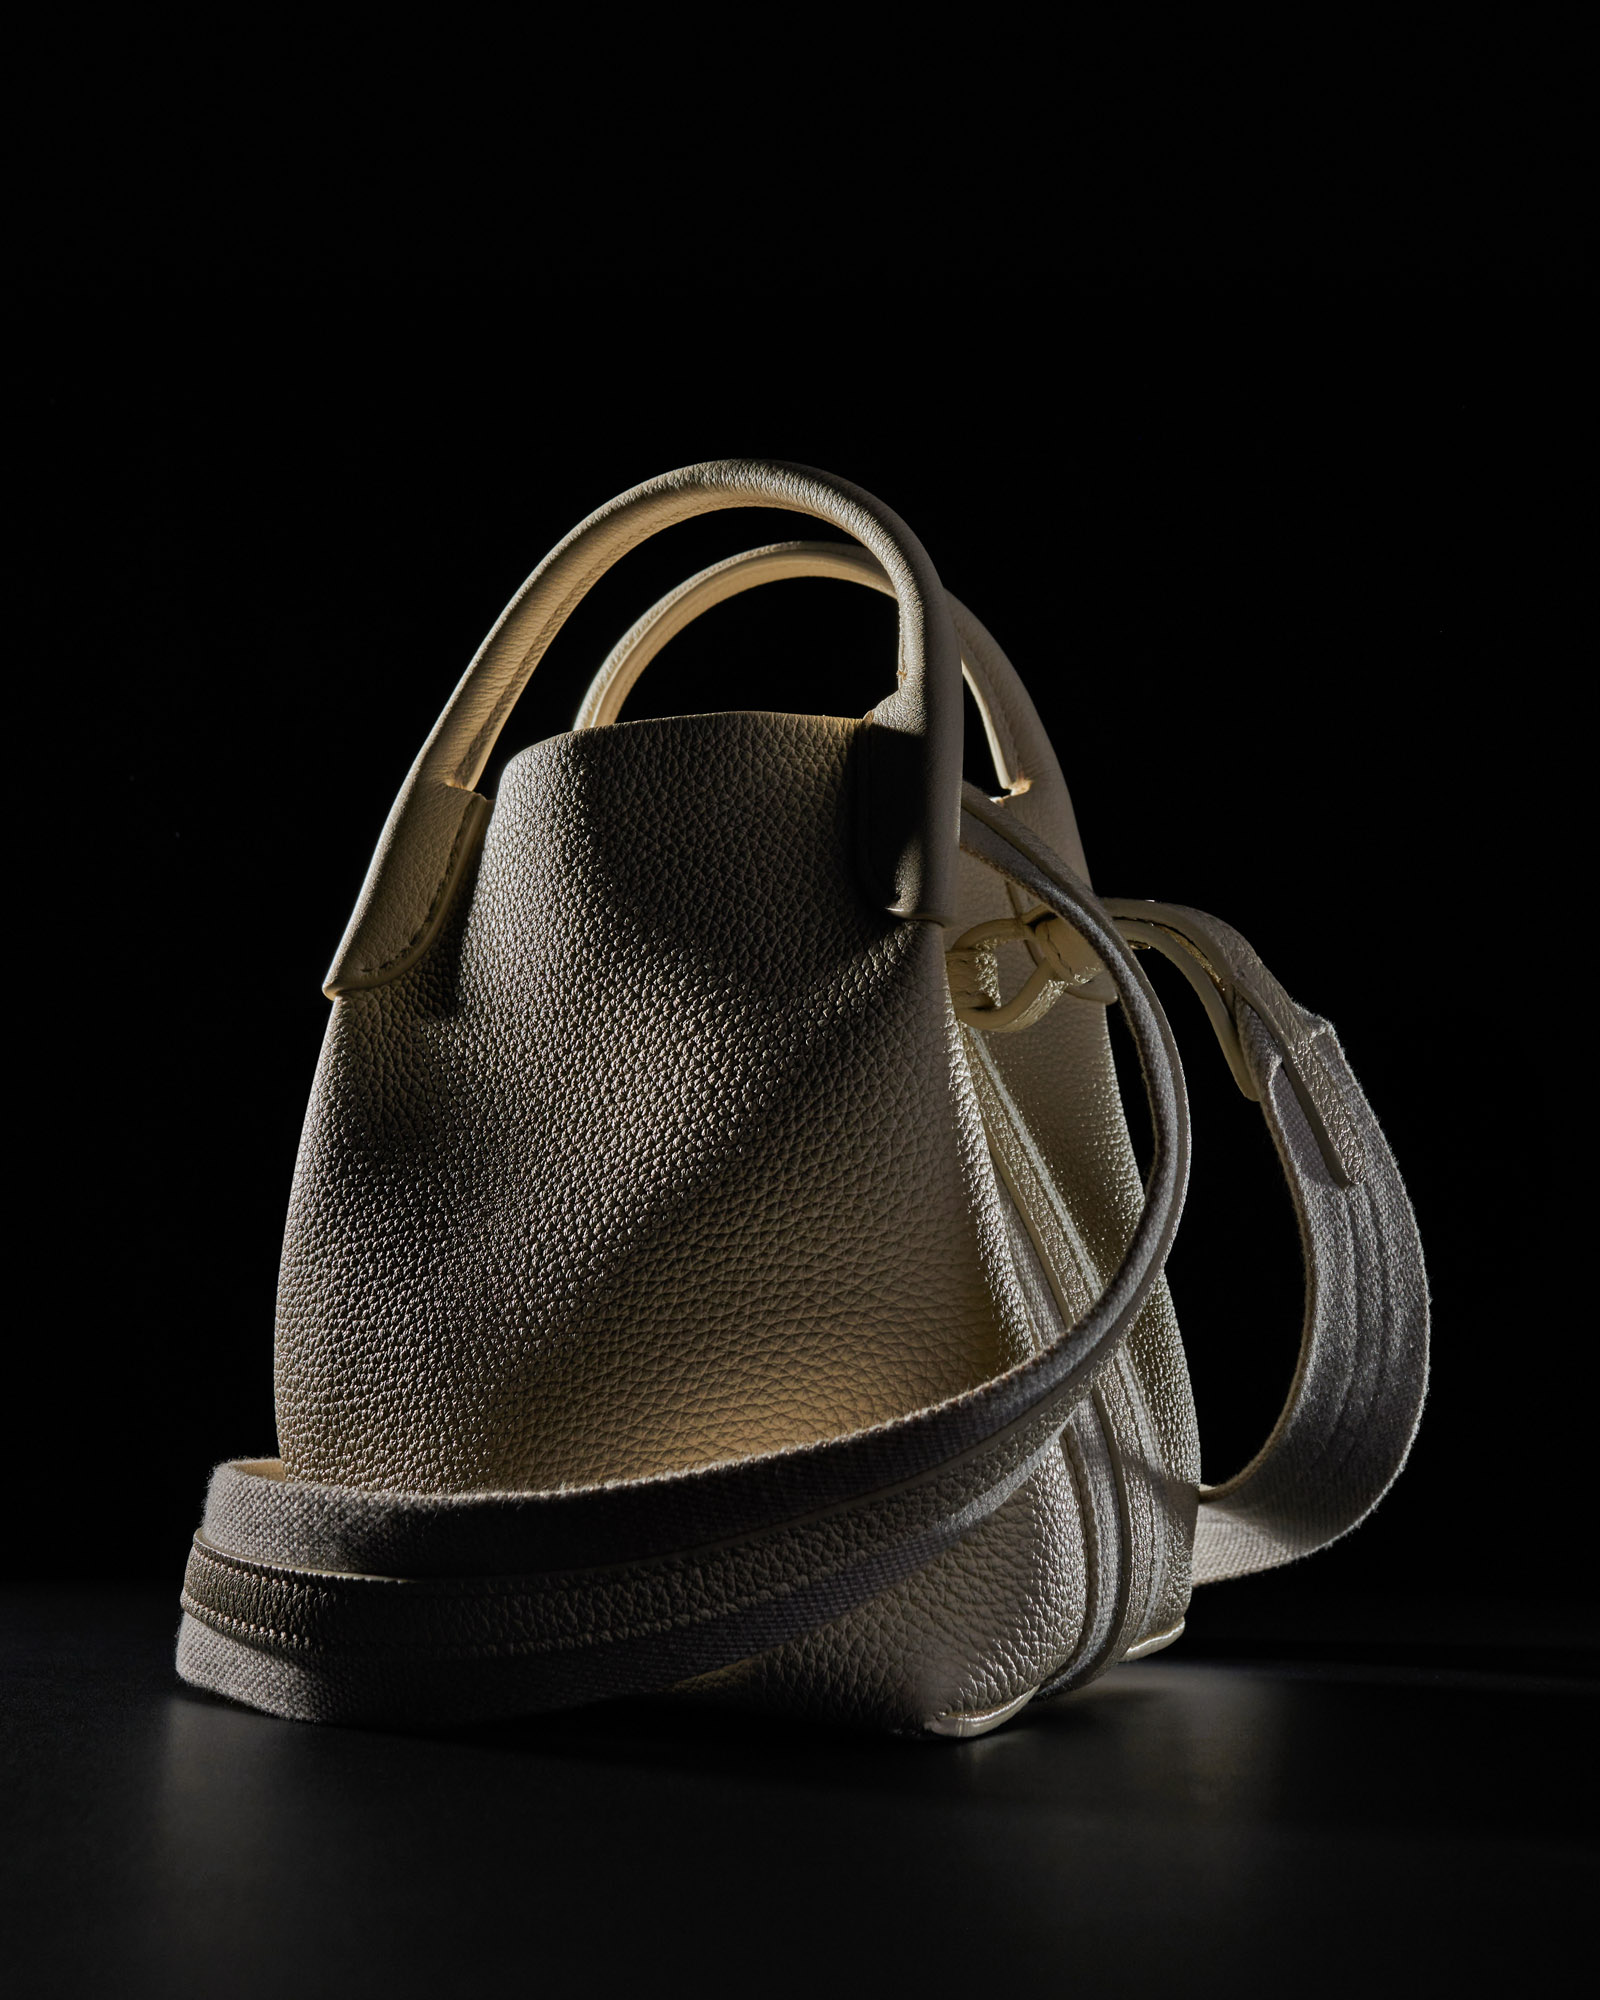 Loro Piana presents its new bag Bale - inspired by the finest